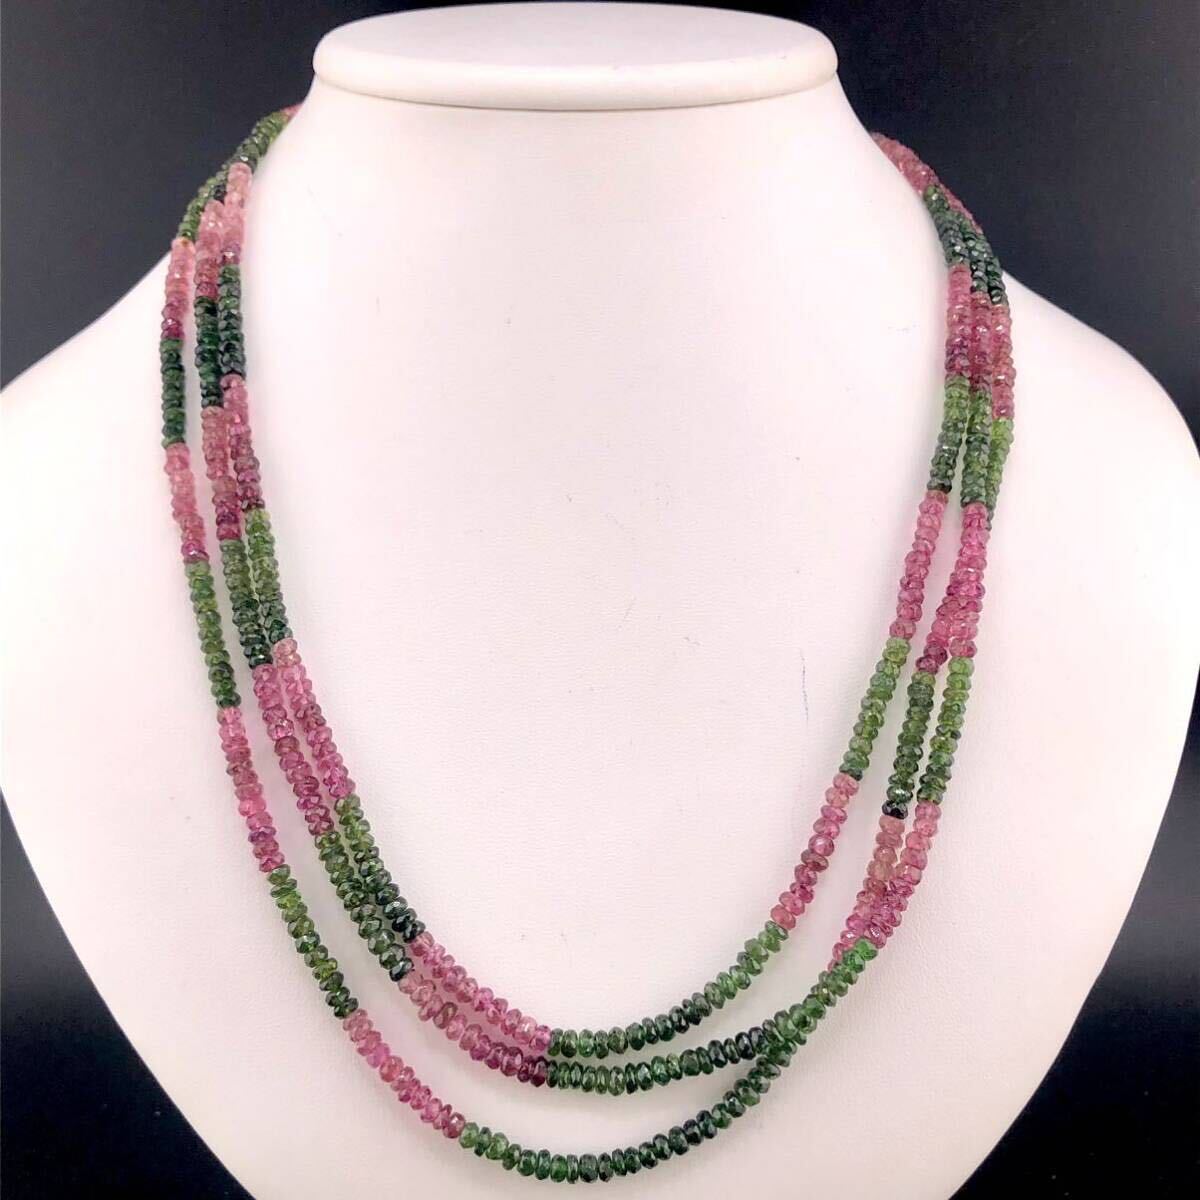 E03-7074 3連☆トルマリンネックレス 約52cm 45g ( tourmaline necklace SILVER jewelry )の画像2